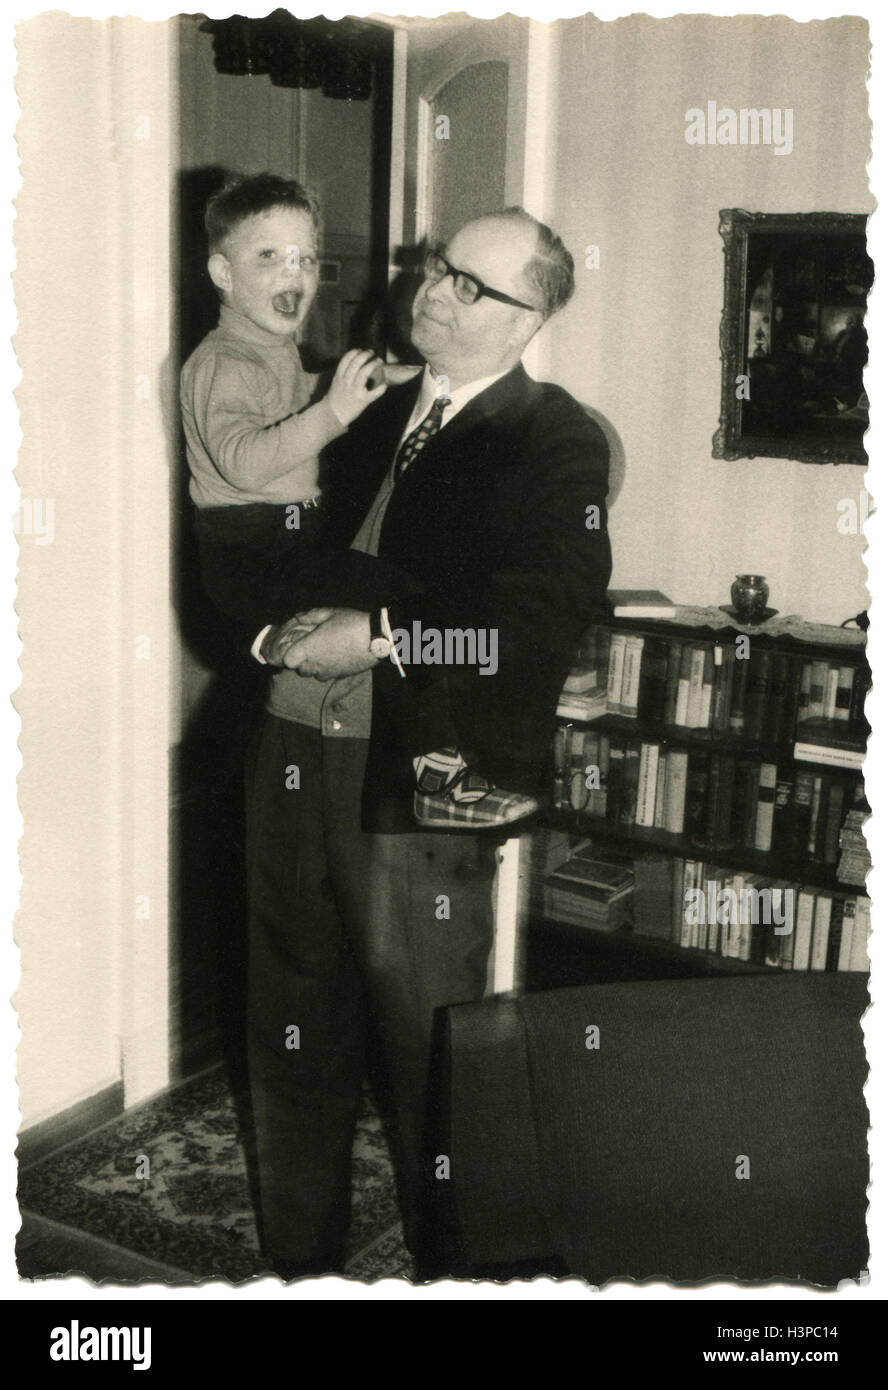 GERMANY - CIRCA 1970: Bald businessman wearing glasses and a business suit is holding a little boy in shorts. He is standing in the living room Stock Photo